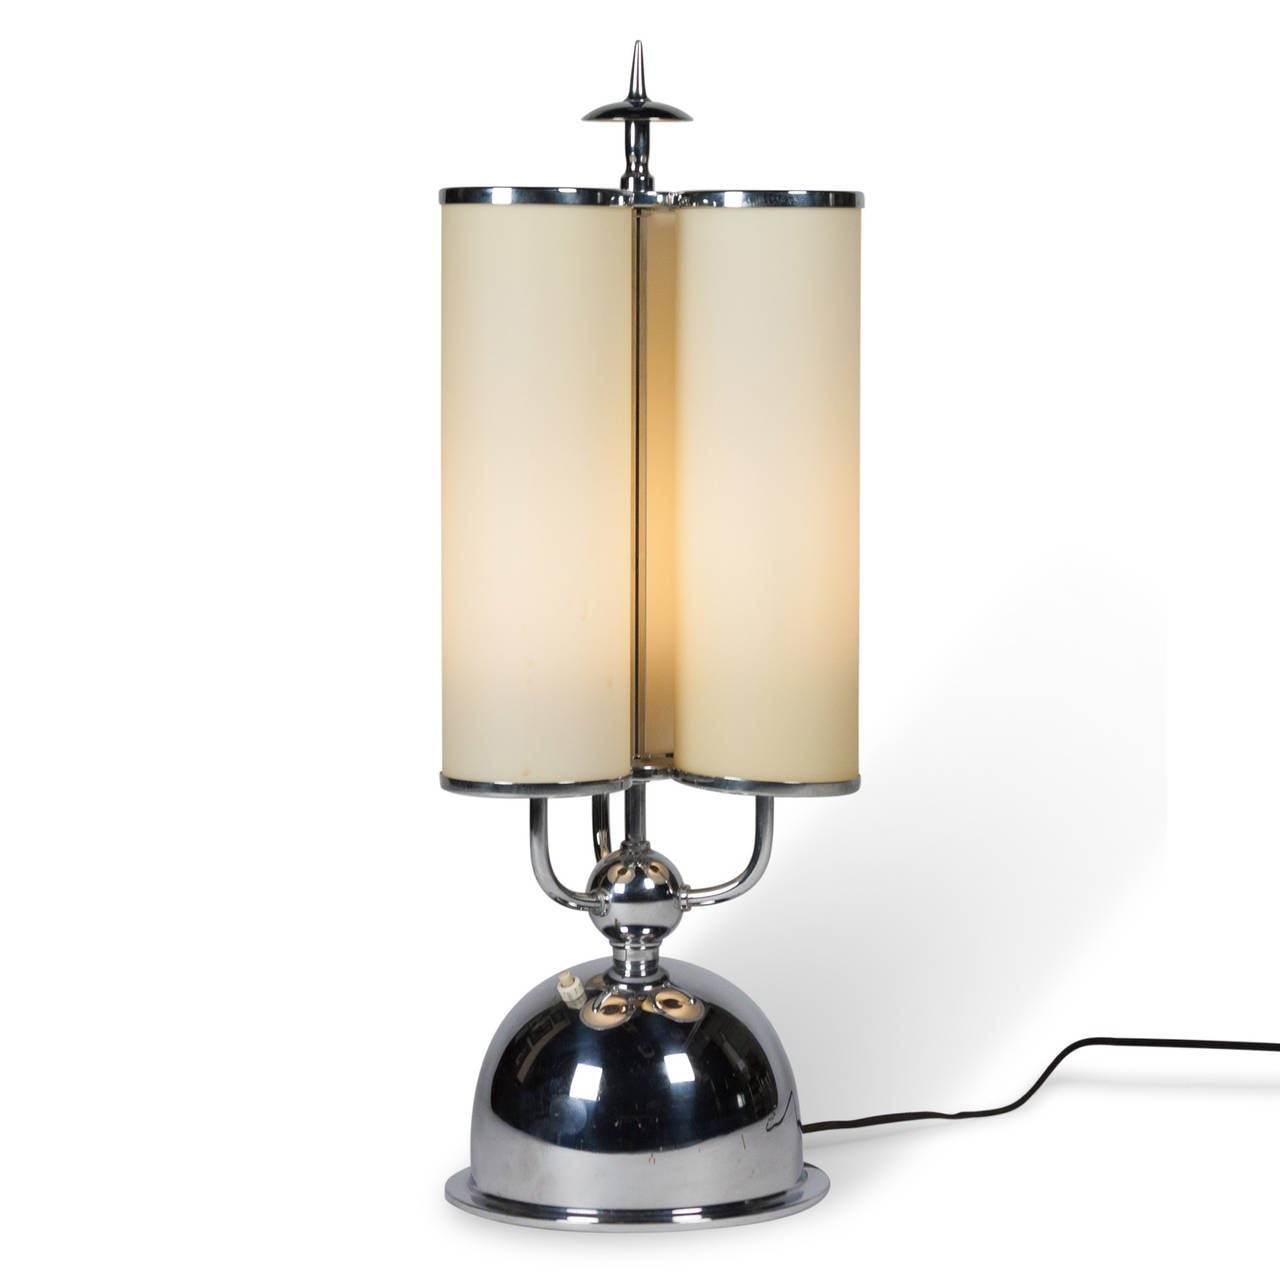 Glass Tube and Chrome Table Lamp by Fritz Breuhaus, German, circa 1930 In Excellent Condition For Sale In Hoboken, NJ